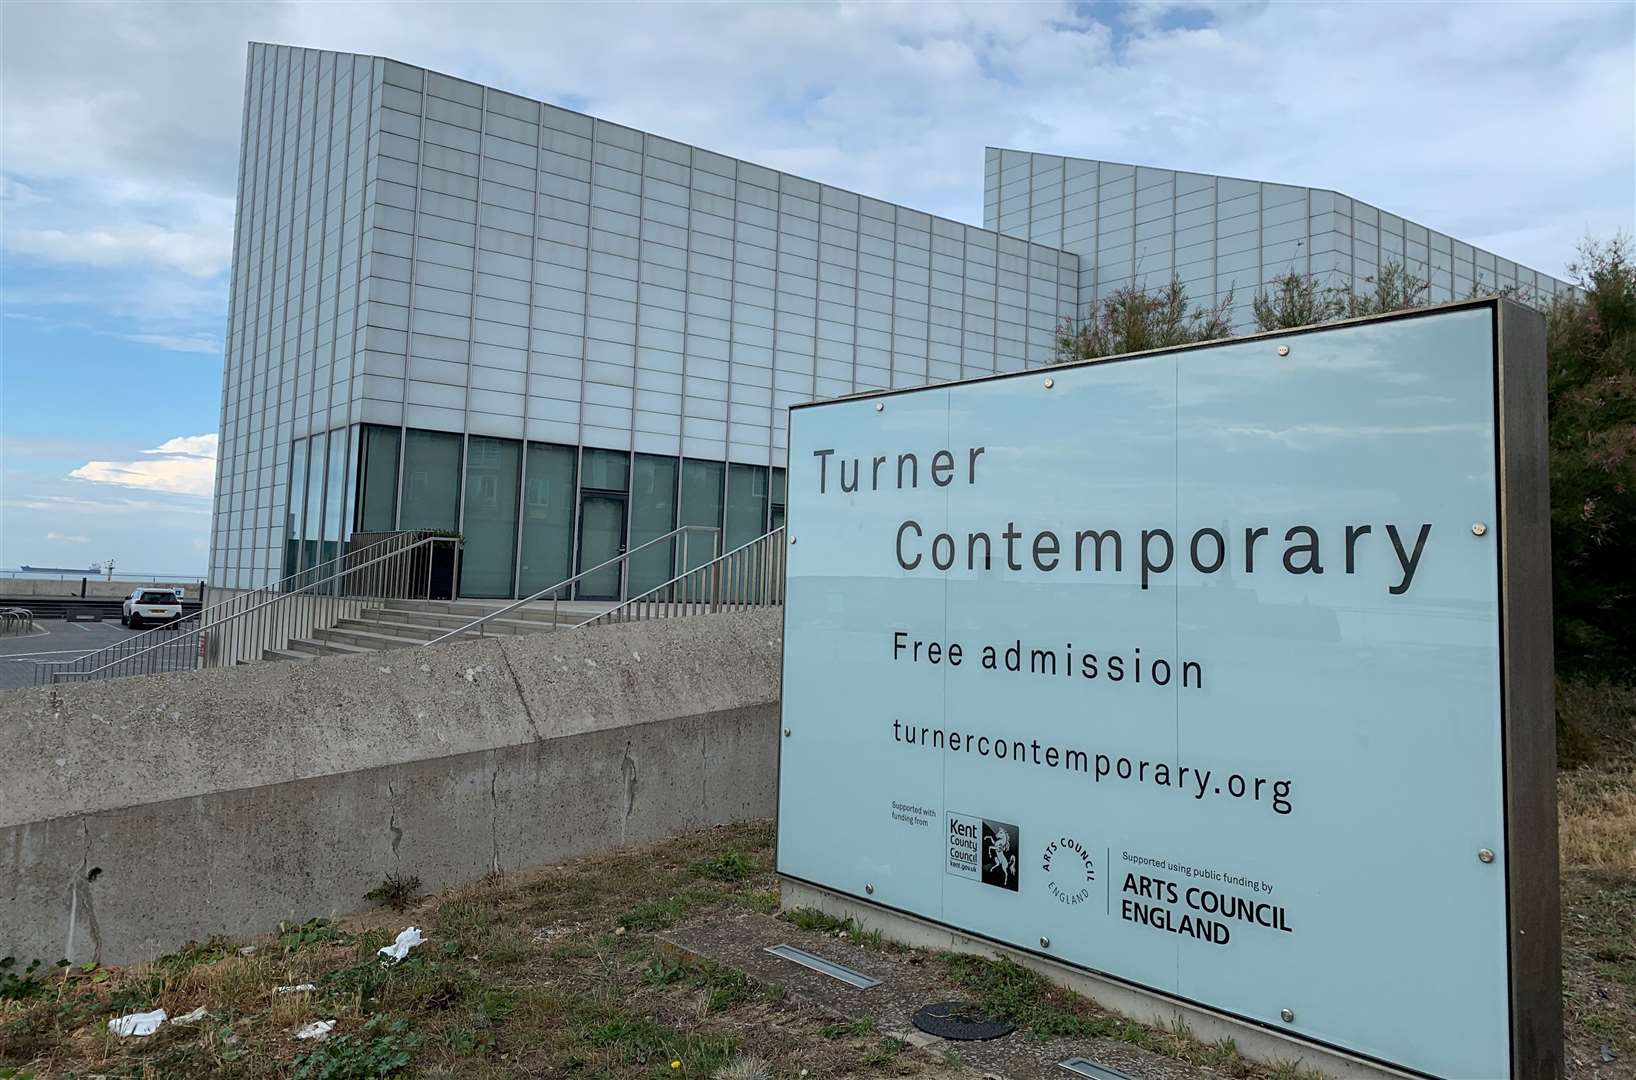 Admission to the Turner Contemporary has always been free